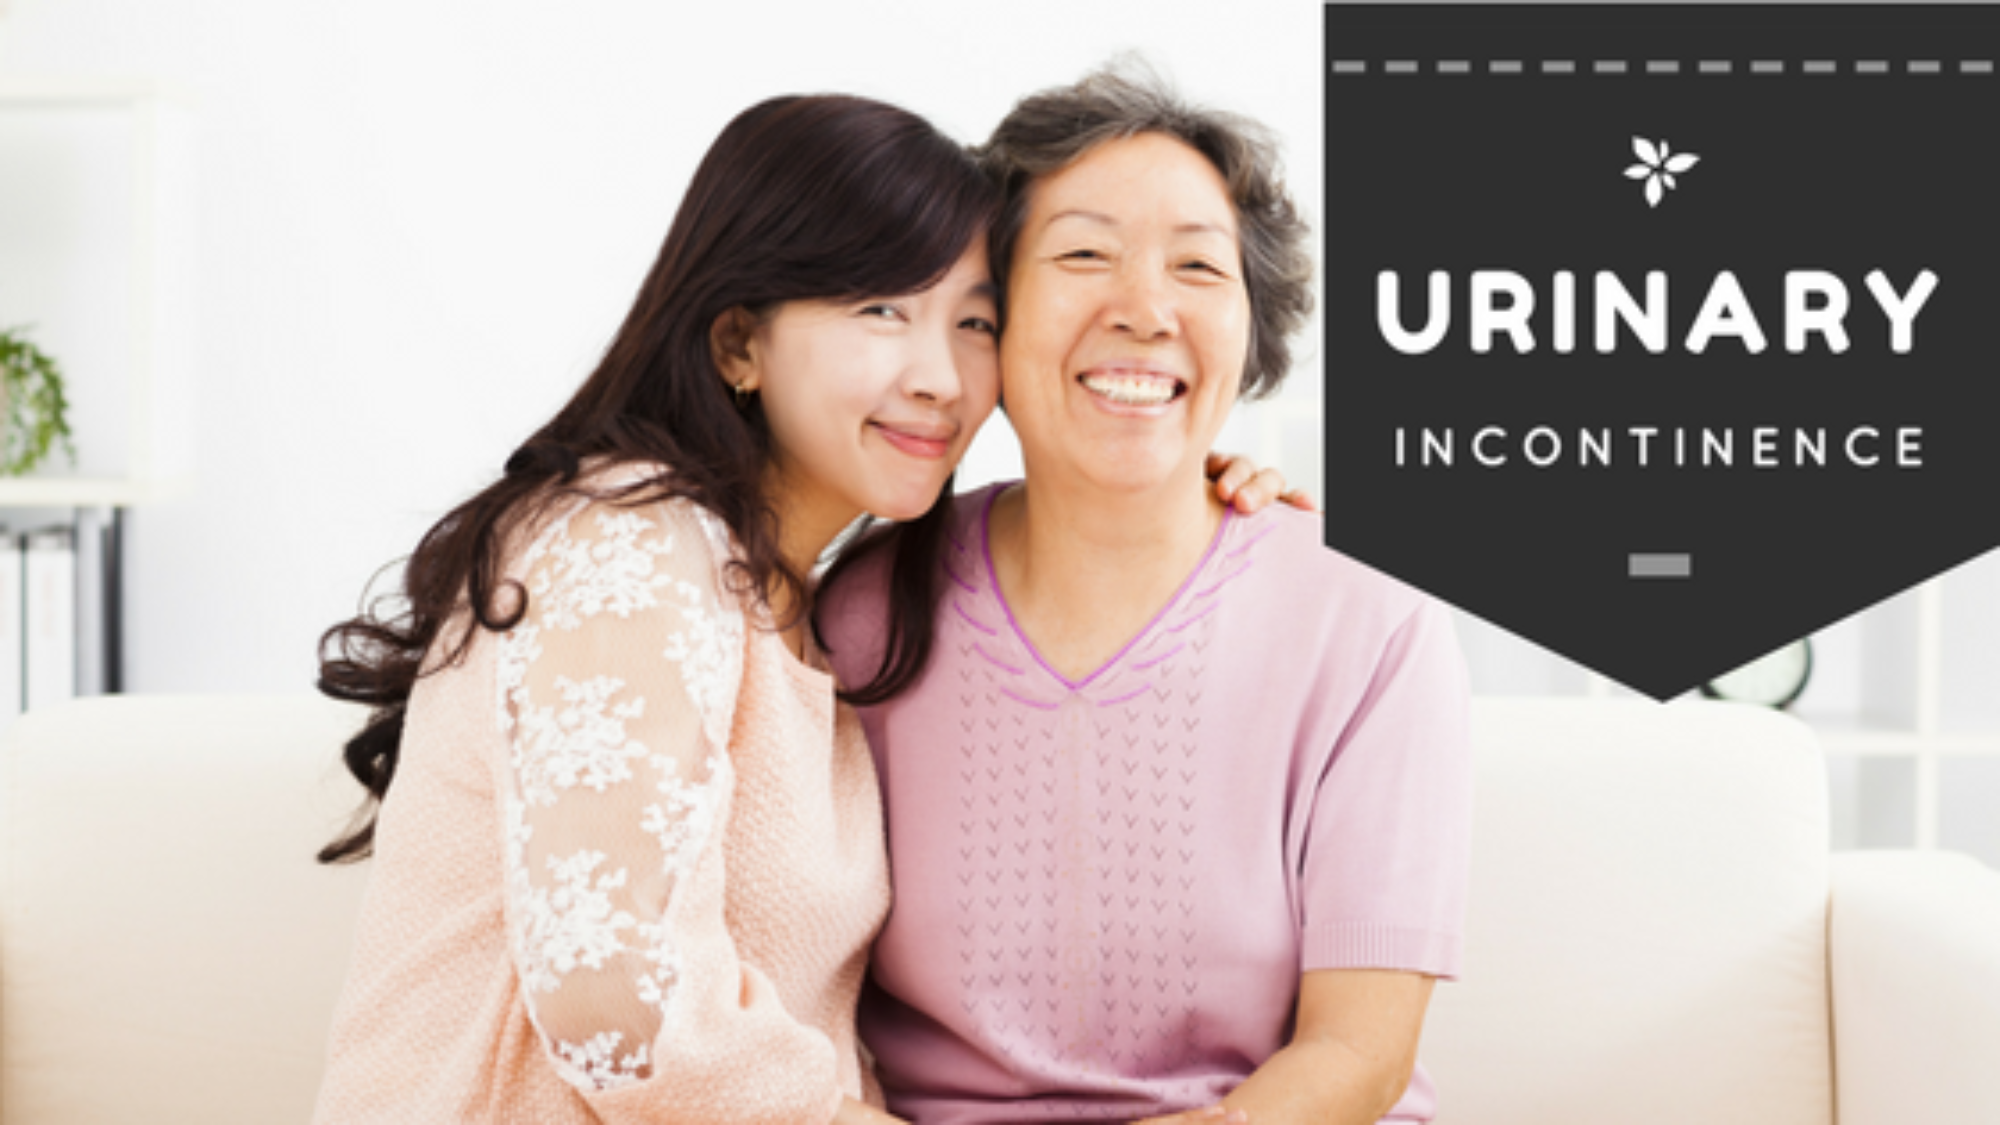 Urinary-incontinence